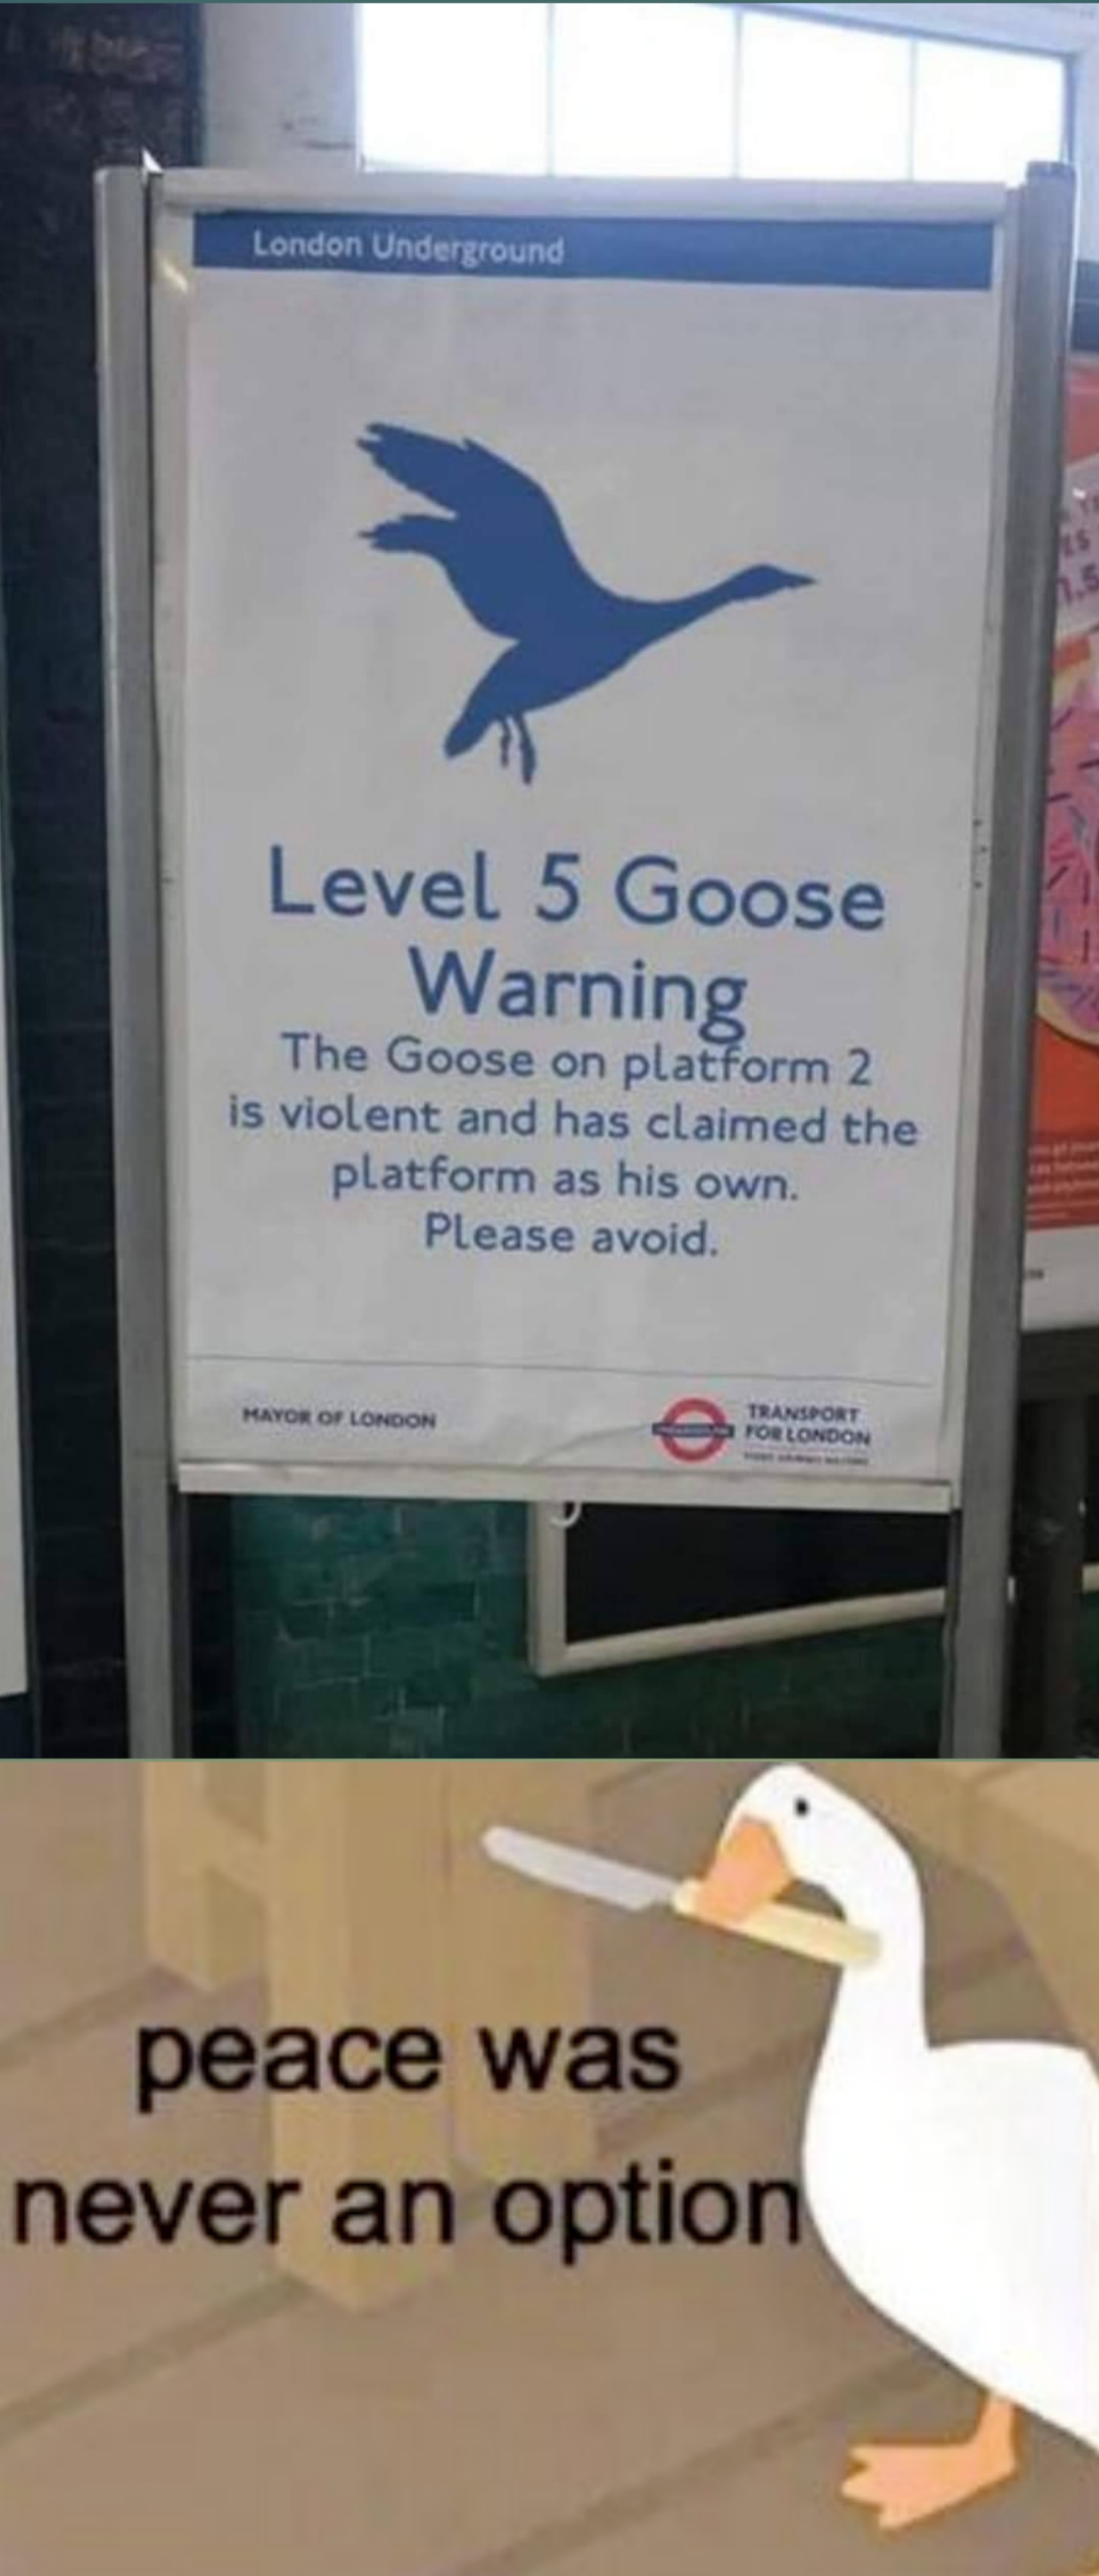 humpday - level 5 goose warning - Level 5 Goose Warning The Goose on platform 2 is violent and has claimed the platform as his own. Please avoid peace was never an option